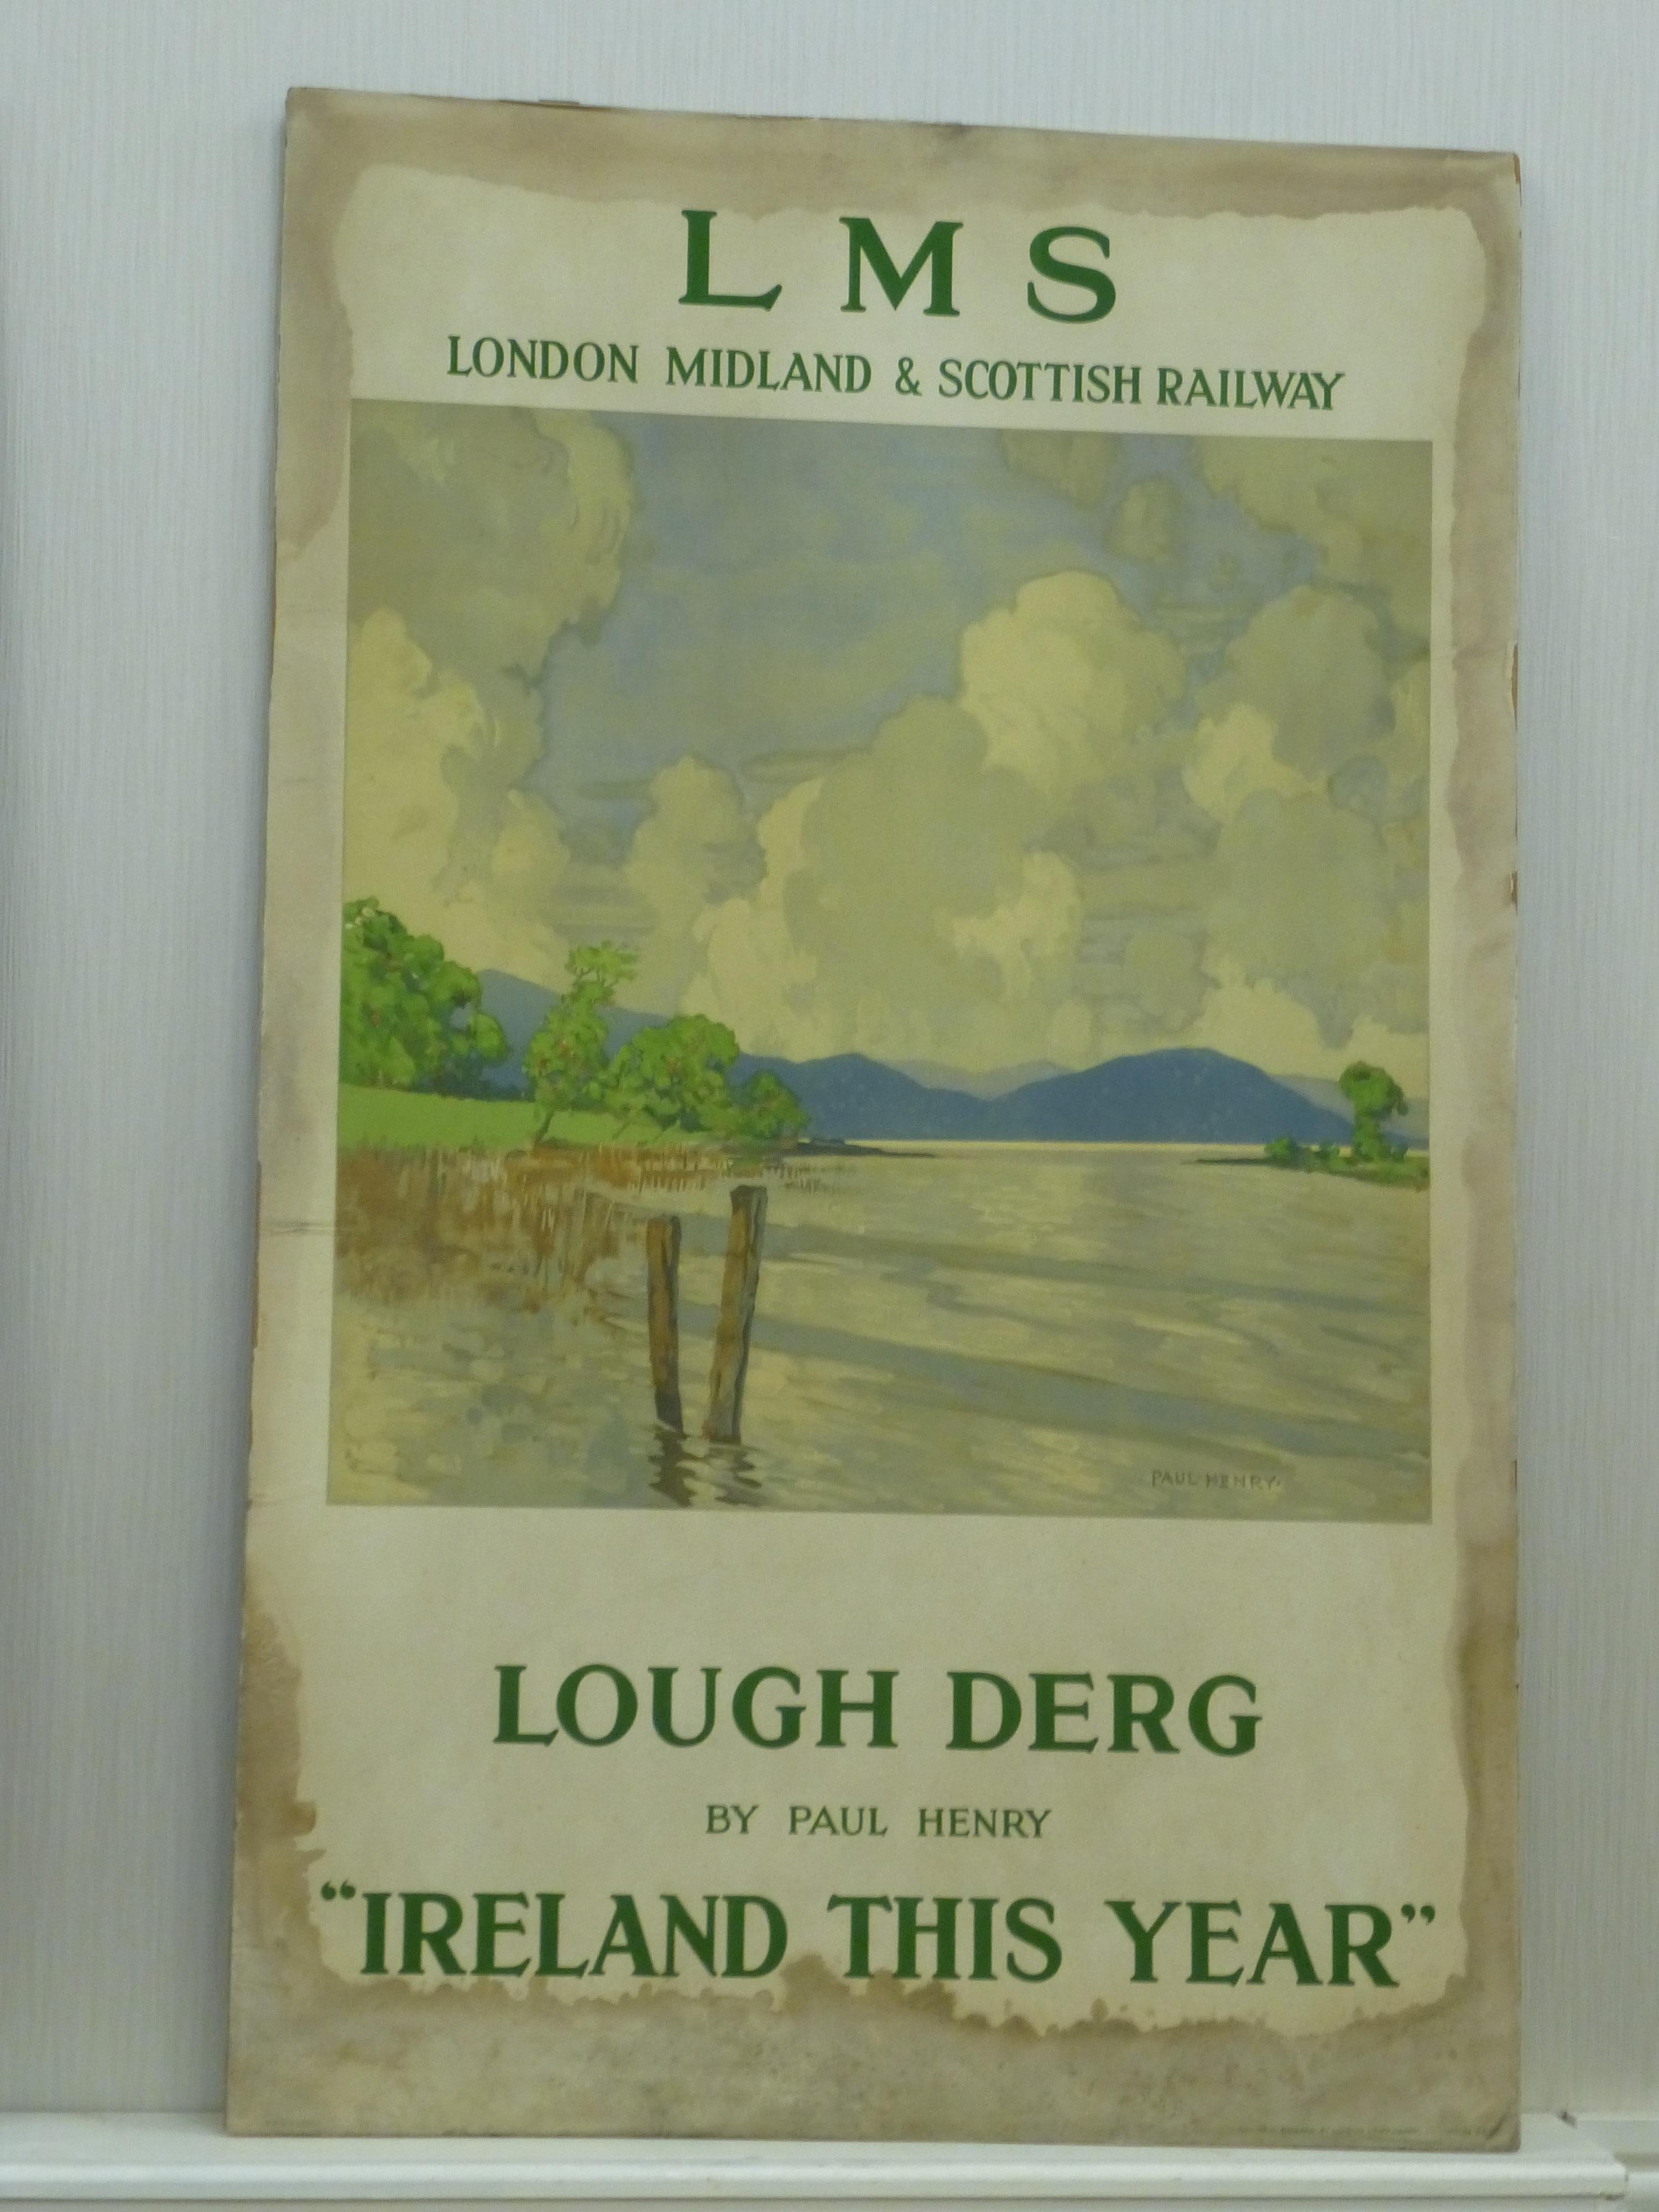 LMS LOUGH DERG BY PAUL HENRY TRAVEL POSTER 40" X 25"